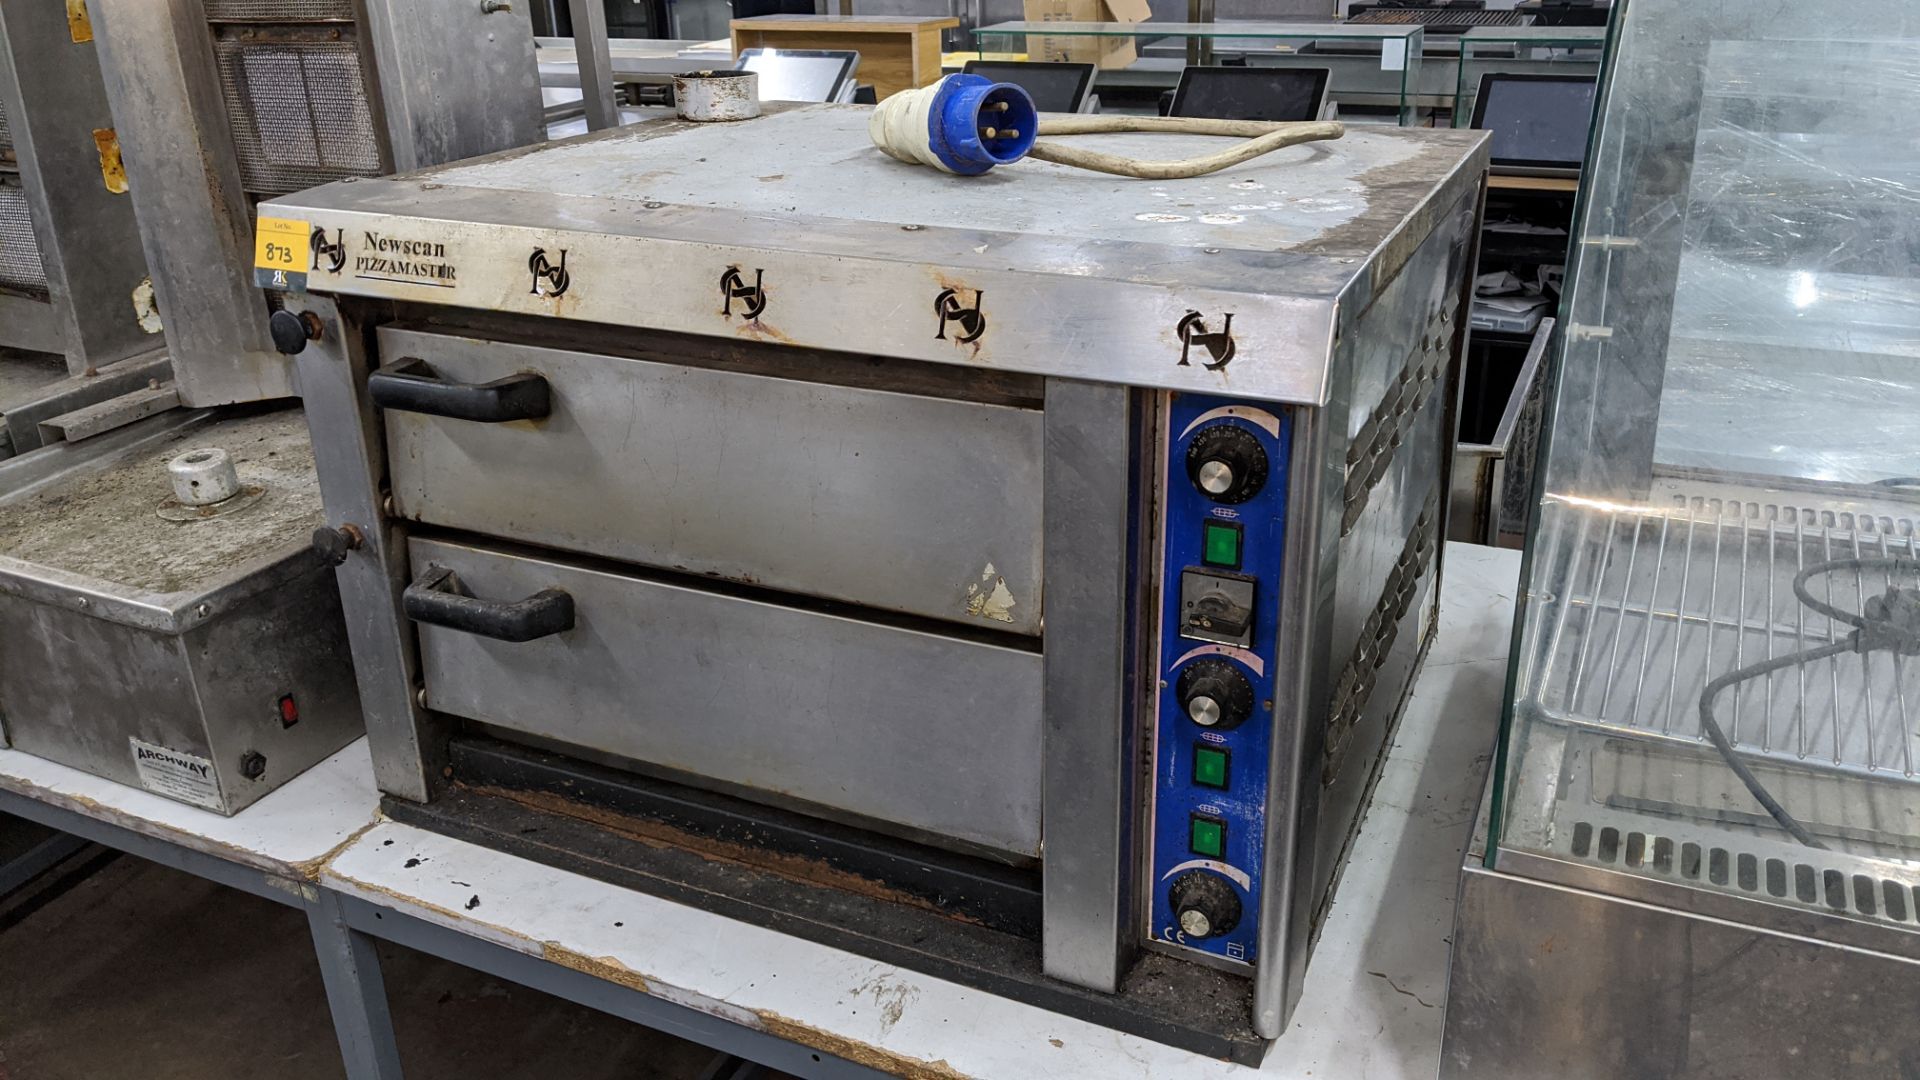 Newscan Pizzamaster twin deck benchtop pizza oven. IMPORTANT: Please remember goods successfully bid - Image 2 of 6